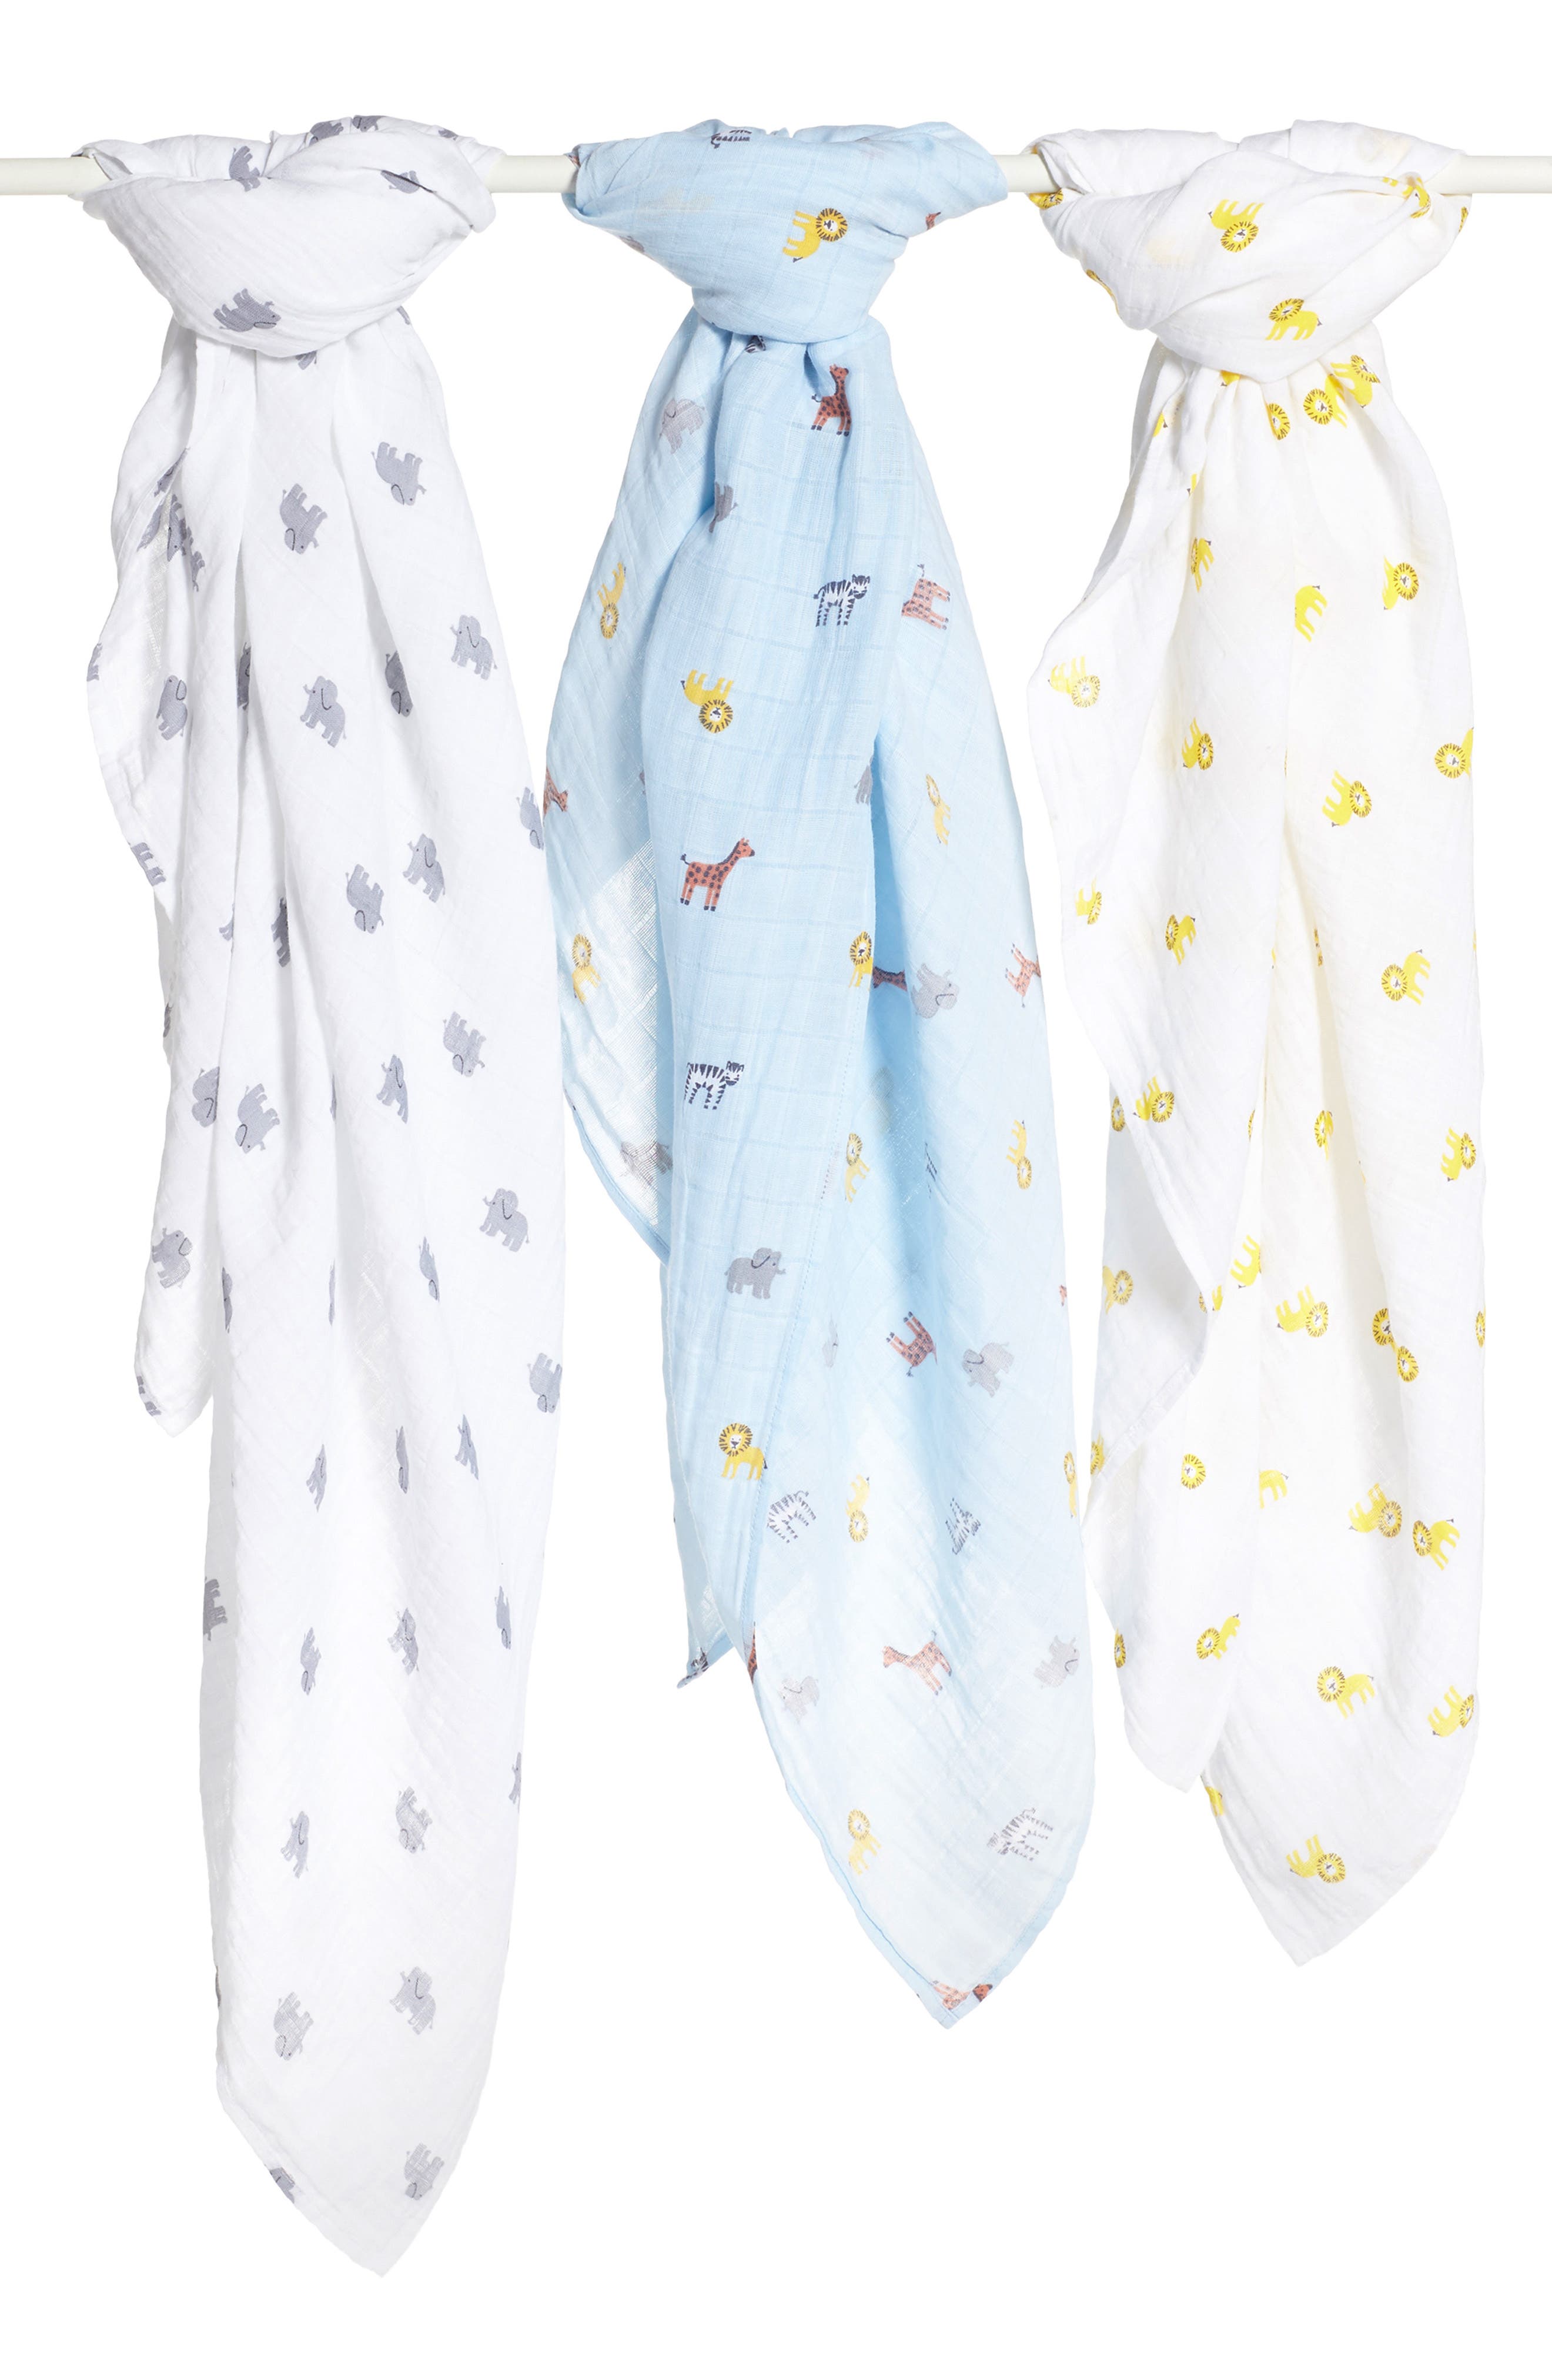 nordstrom baby girl gifts